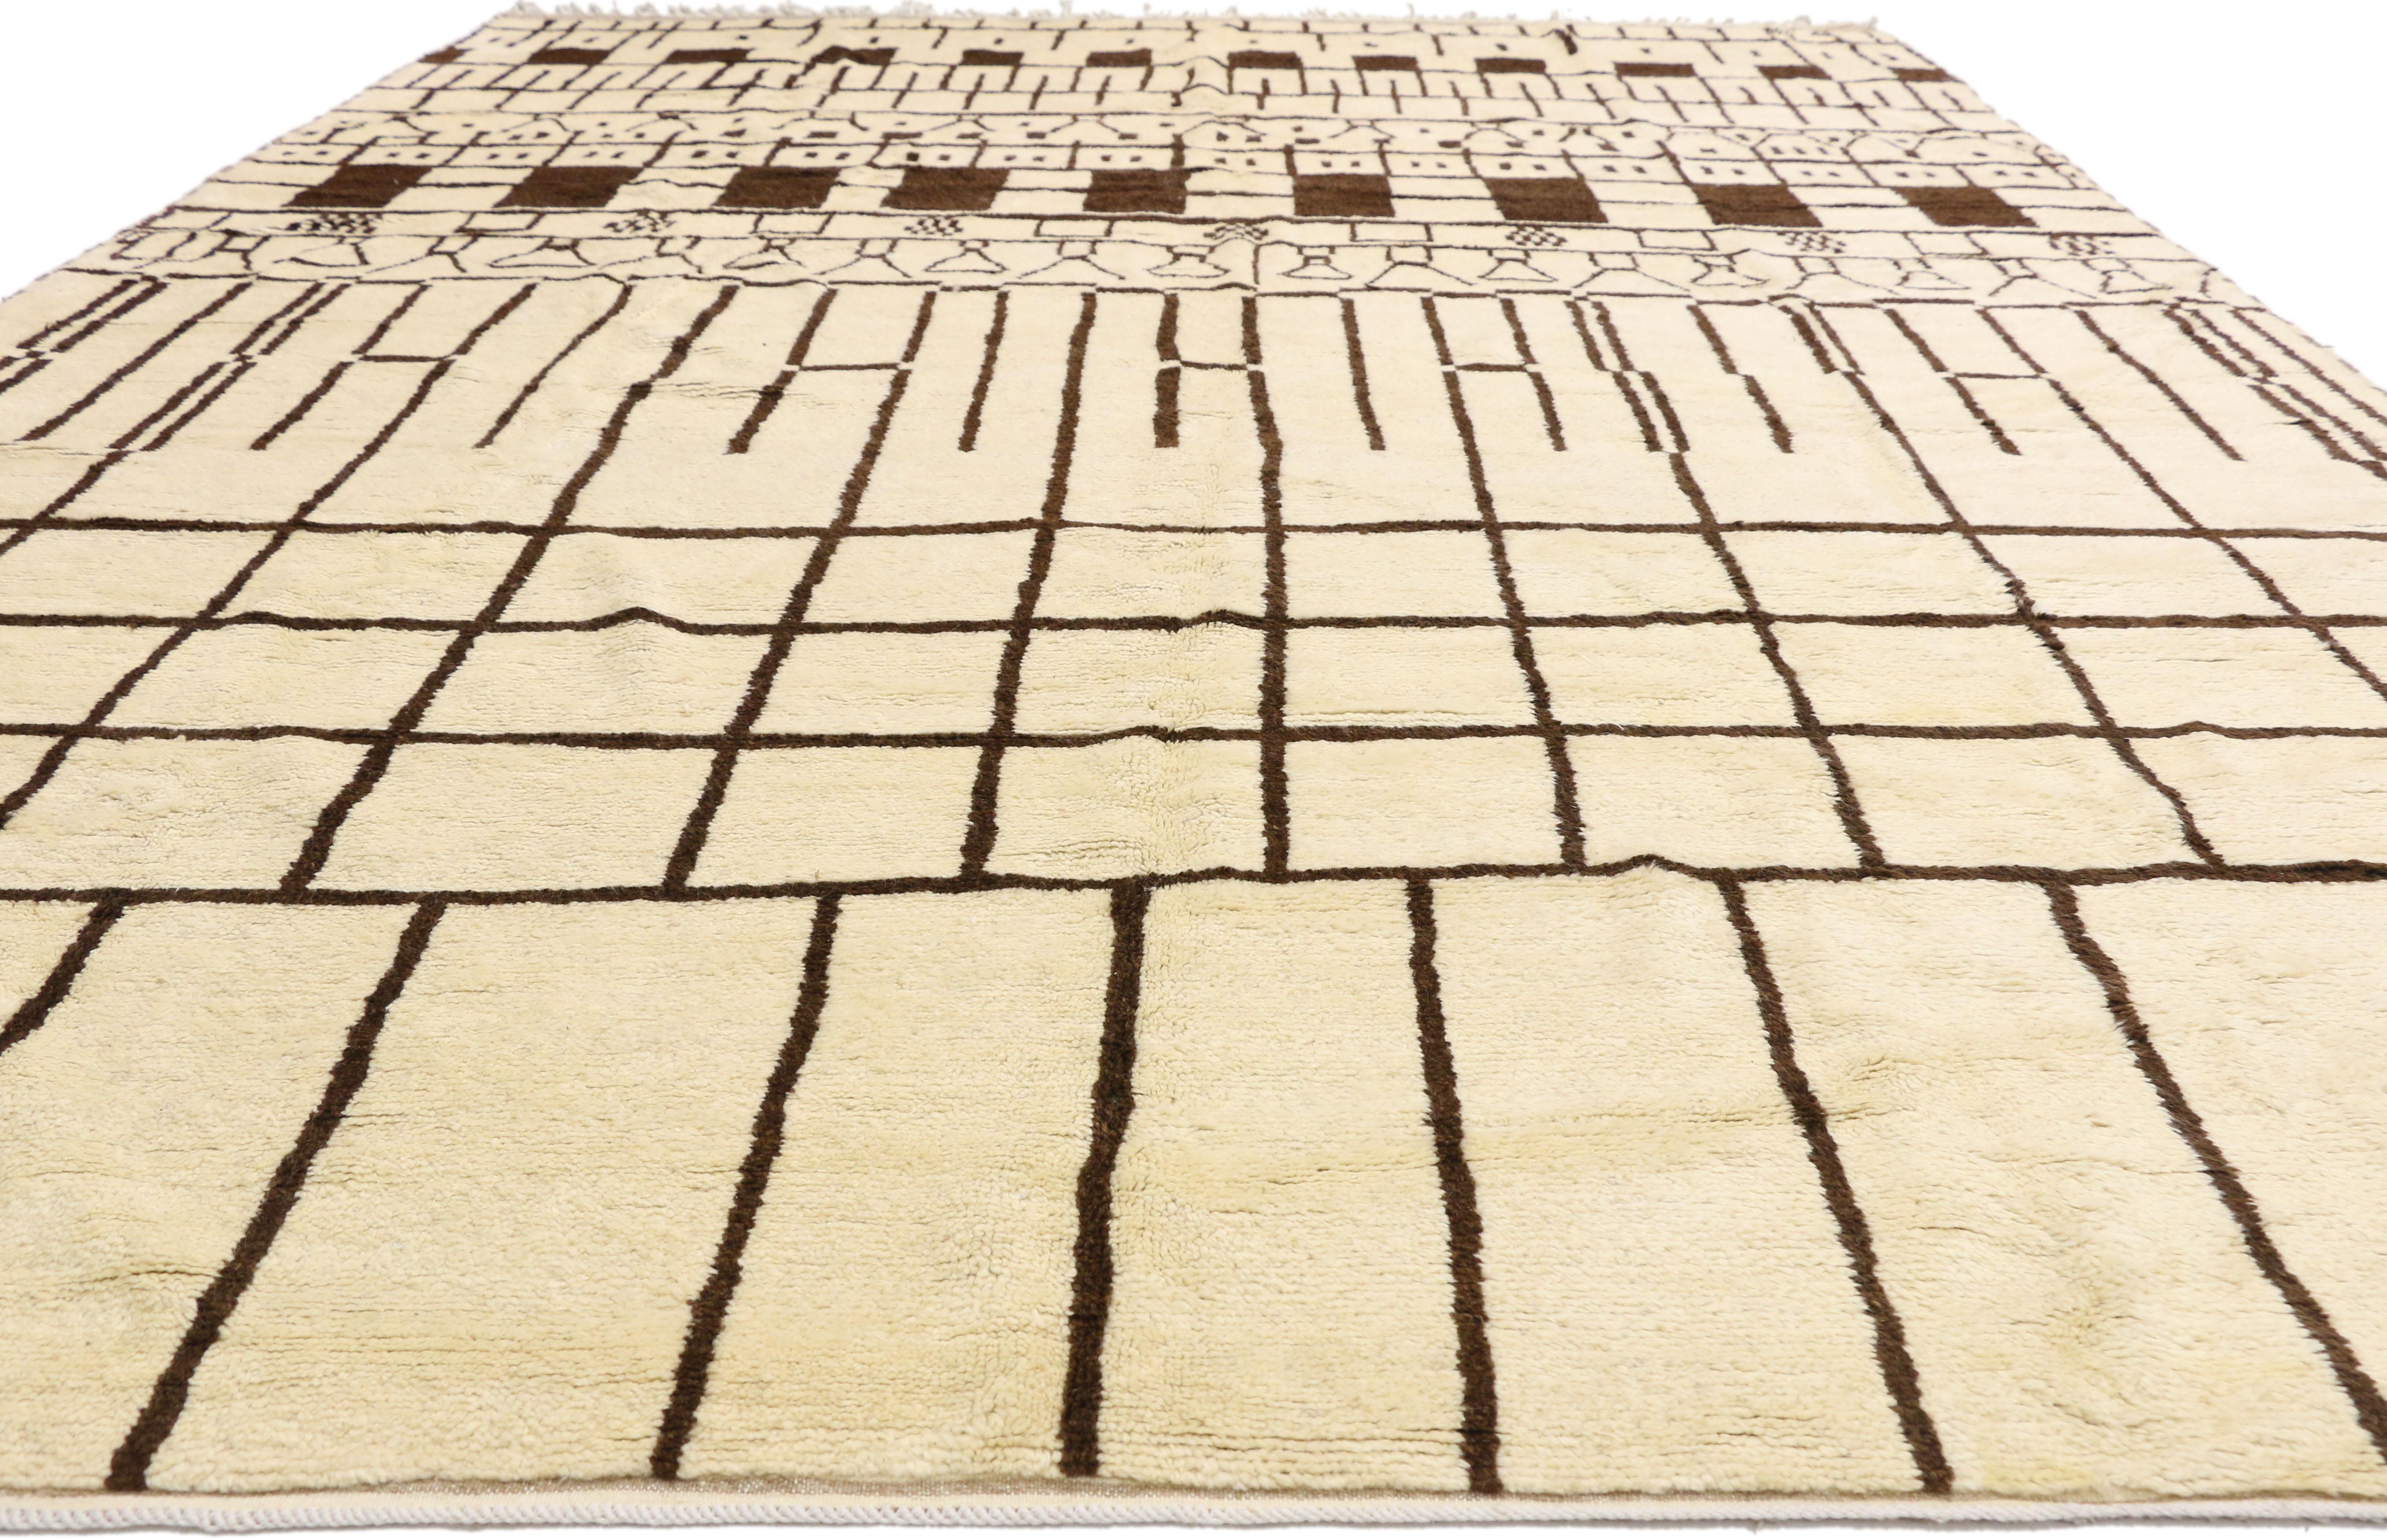 Bauhaus Large Authentic Berber Moroccan Rug with Neutral Earth-Tone Colors For Sale